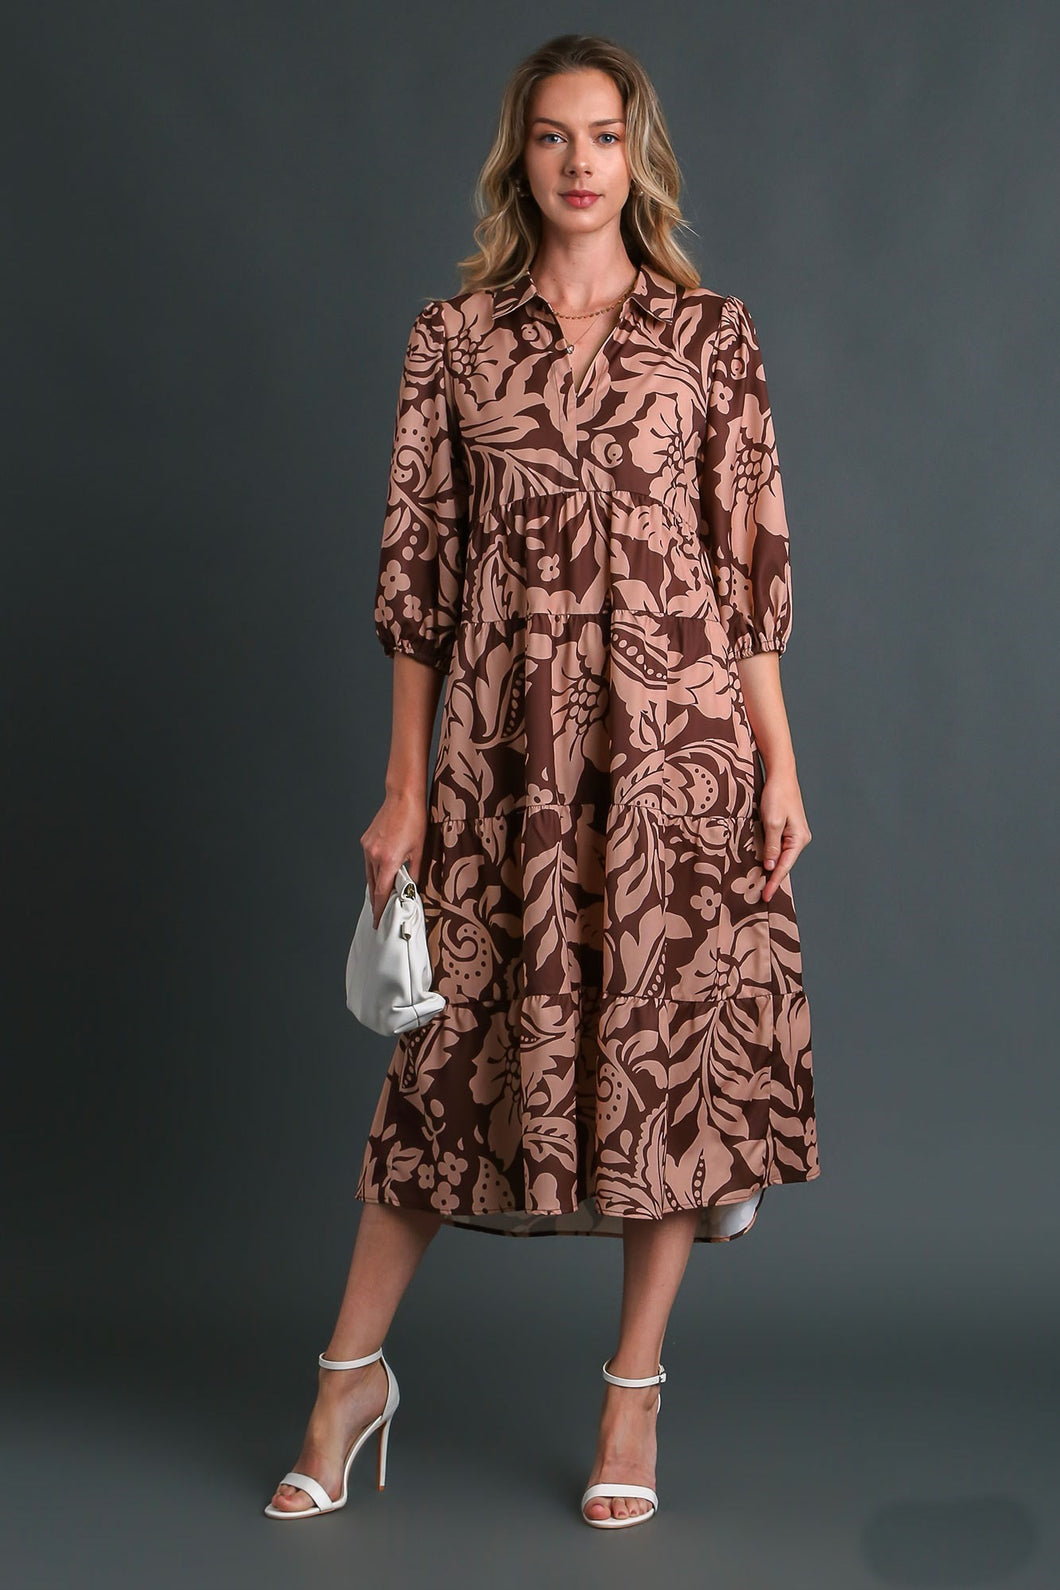 Umgee Two Toned Floral Print Tiered Midi Dress in Brown Dress Umgee   